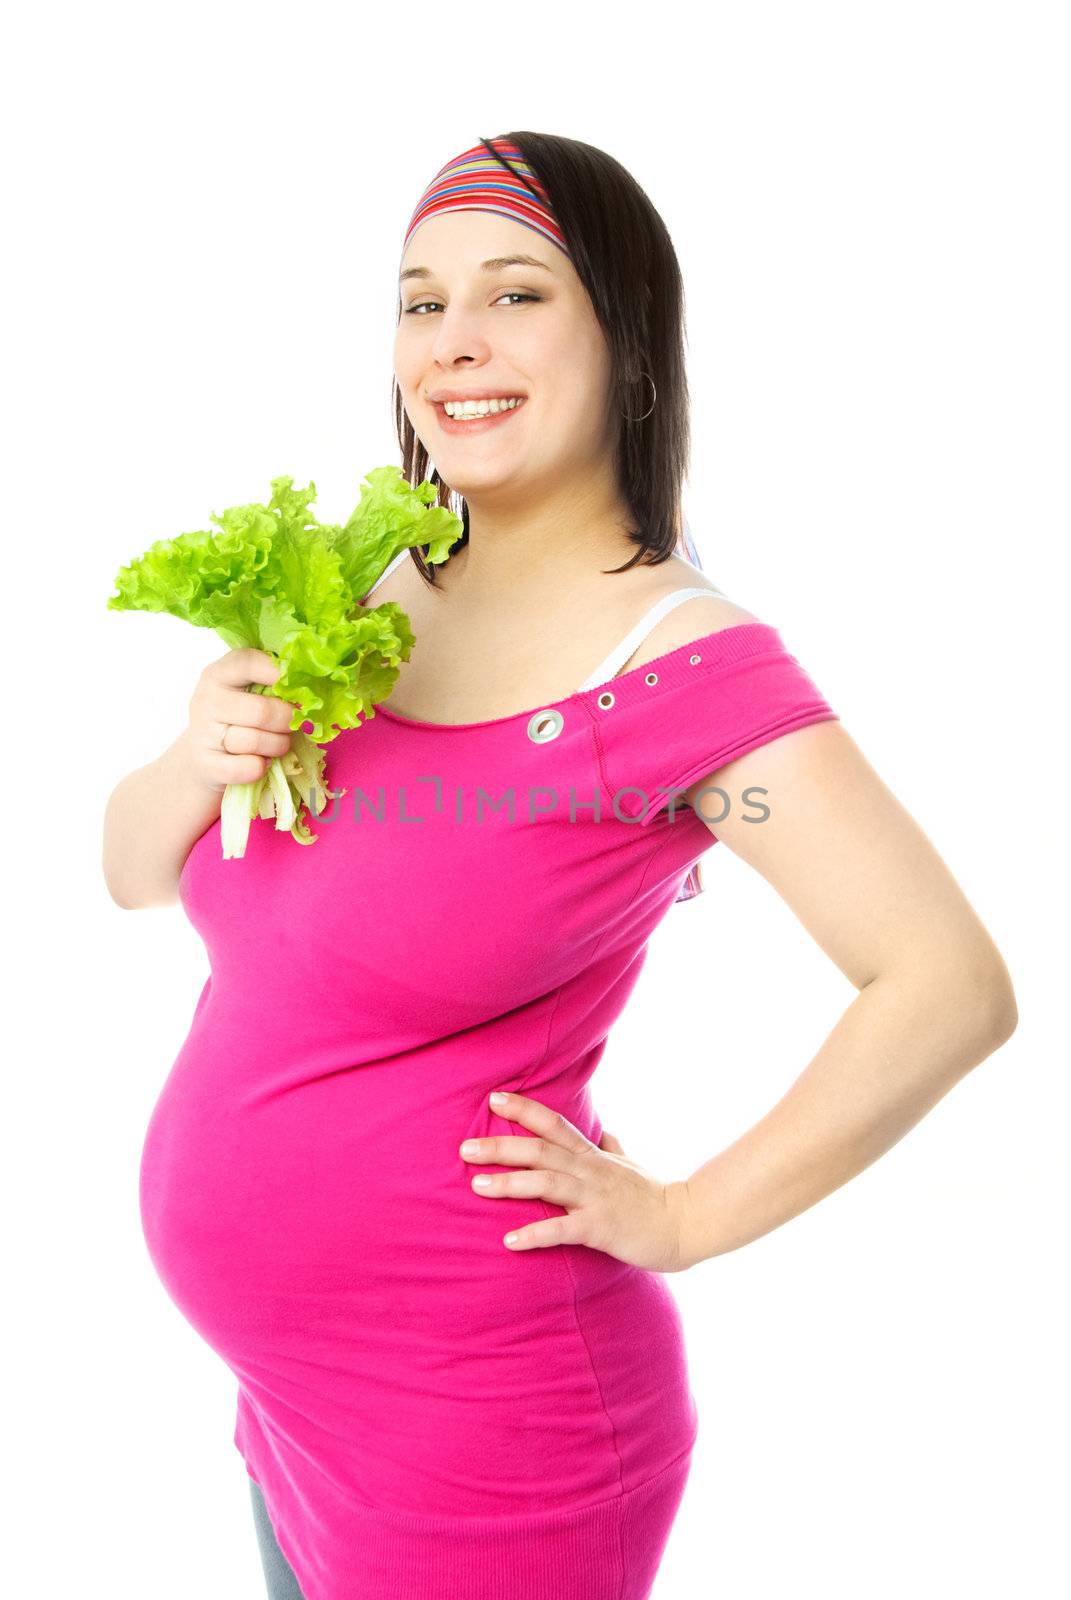 portrait of a happy young pregnant woman eating green salad